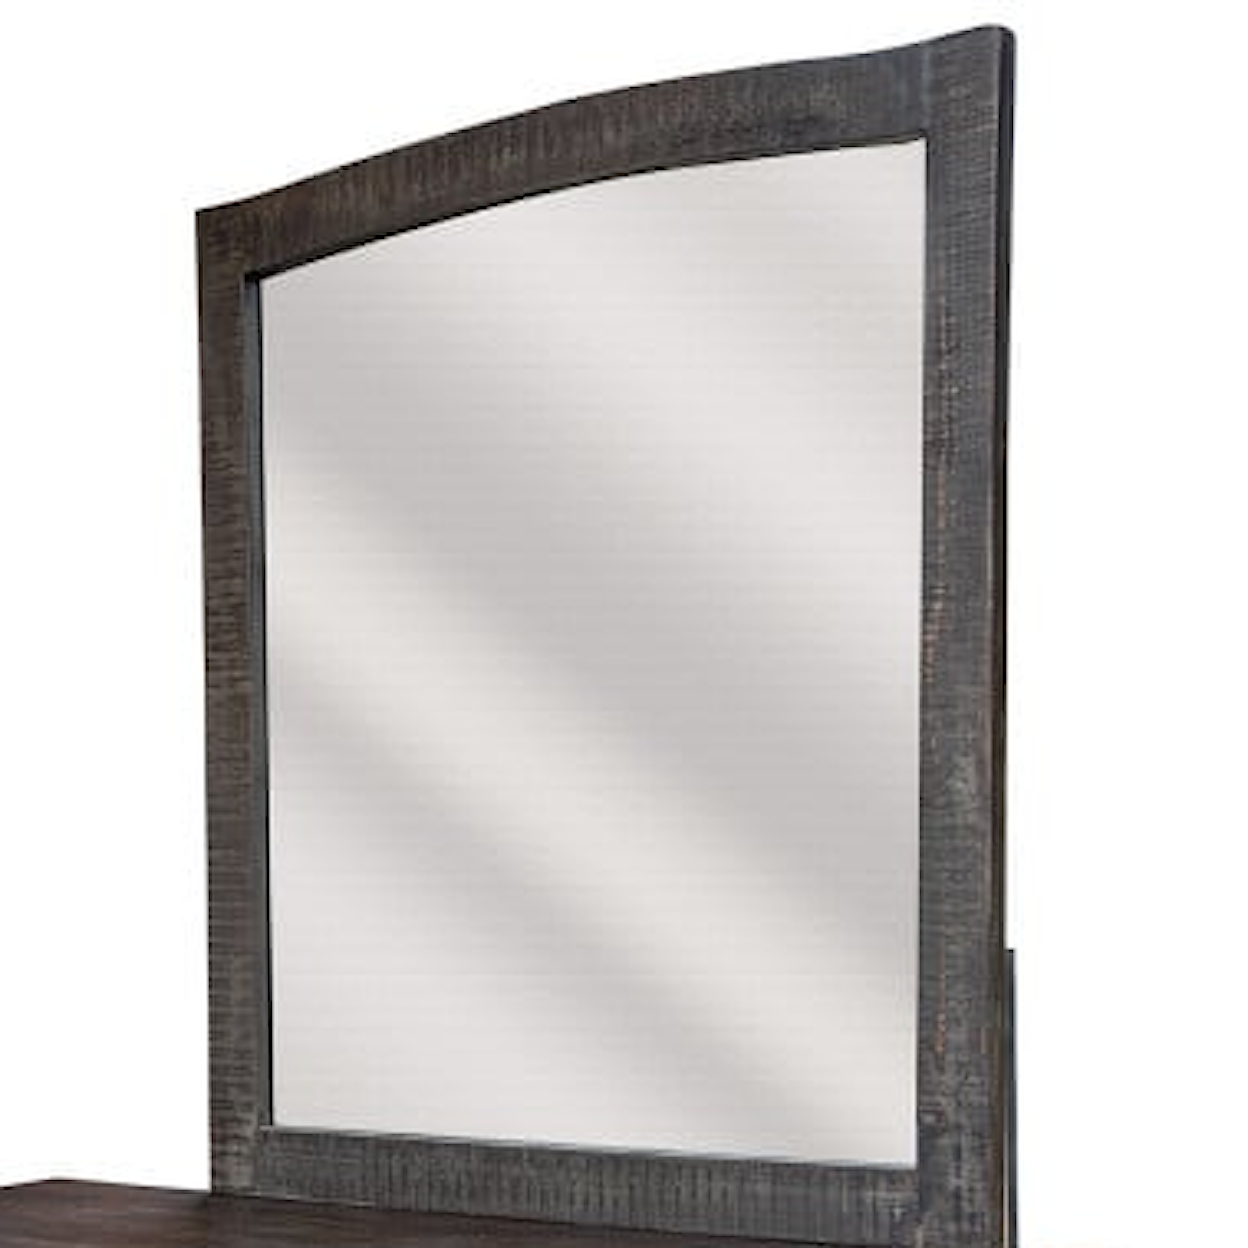 International Furniture Direct Nogales Bedroom Collection Dresser Mirror with Solid Pine Trim